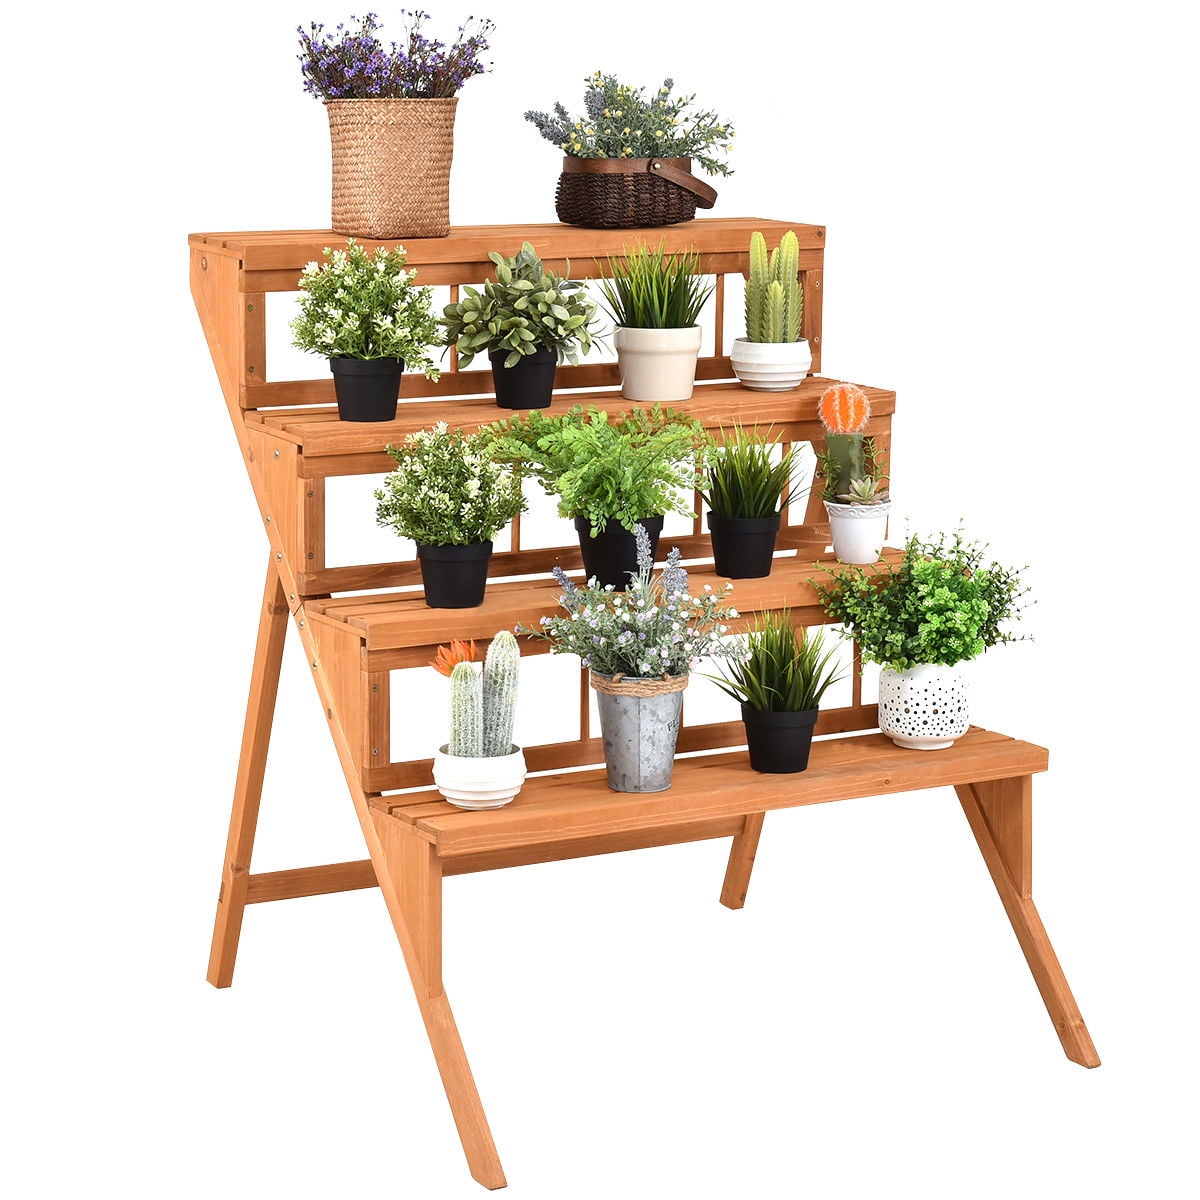 Details about   3 Tier Folding Flower Stand Wooden Succulent Plant Pot Display Stand Ladder Rack 